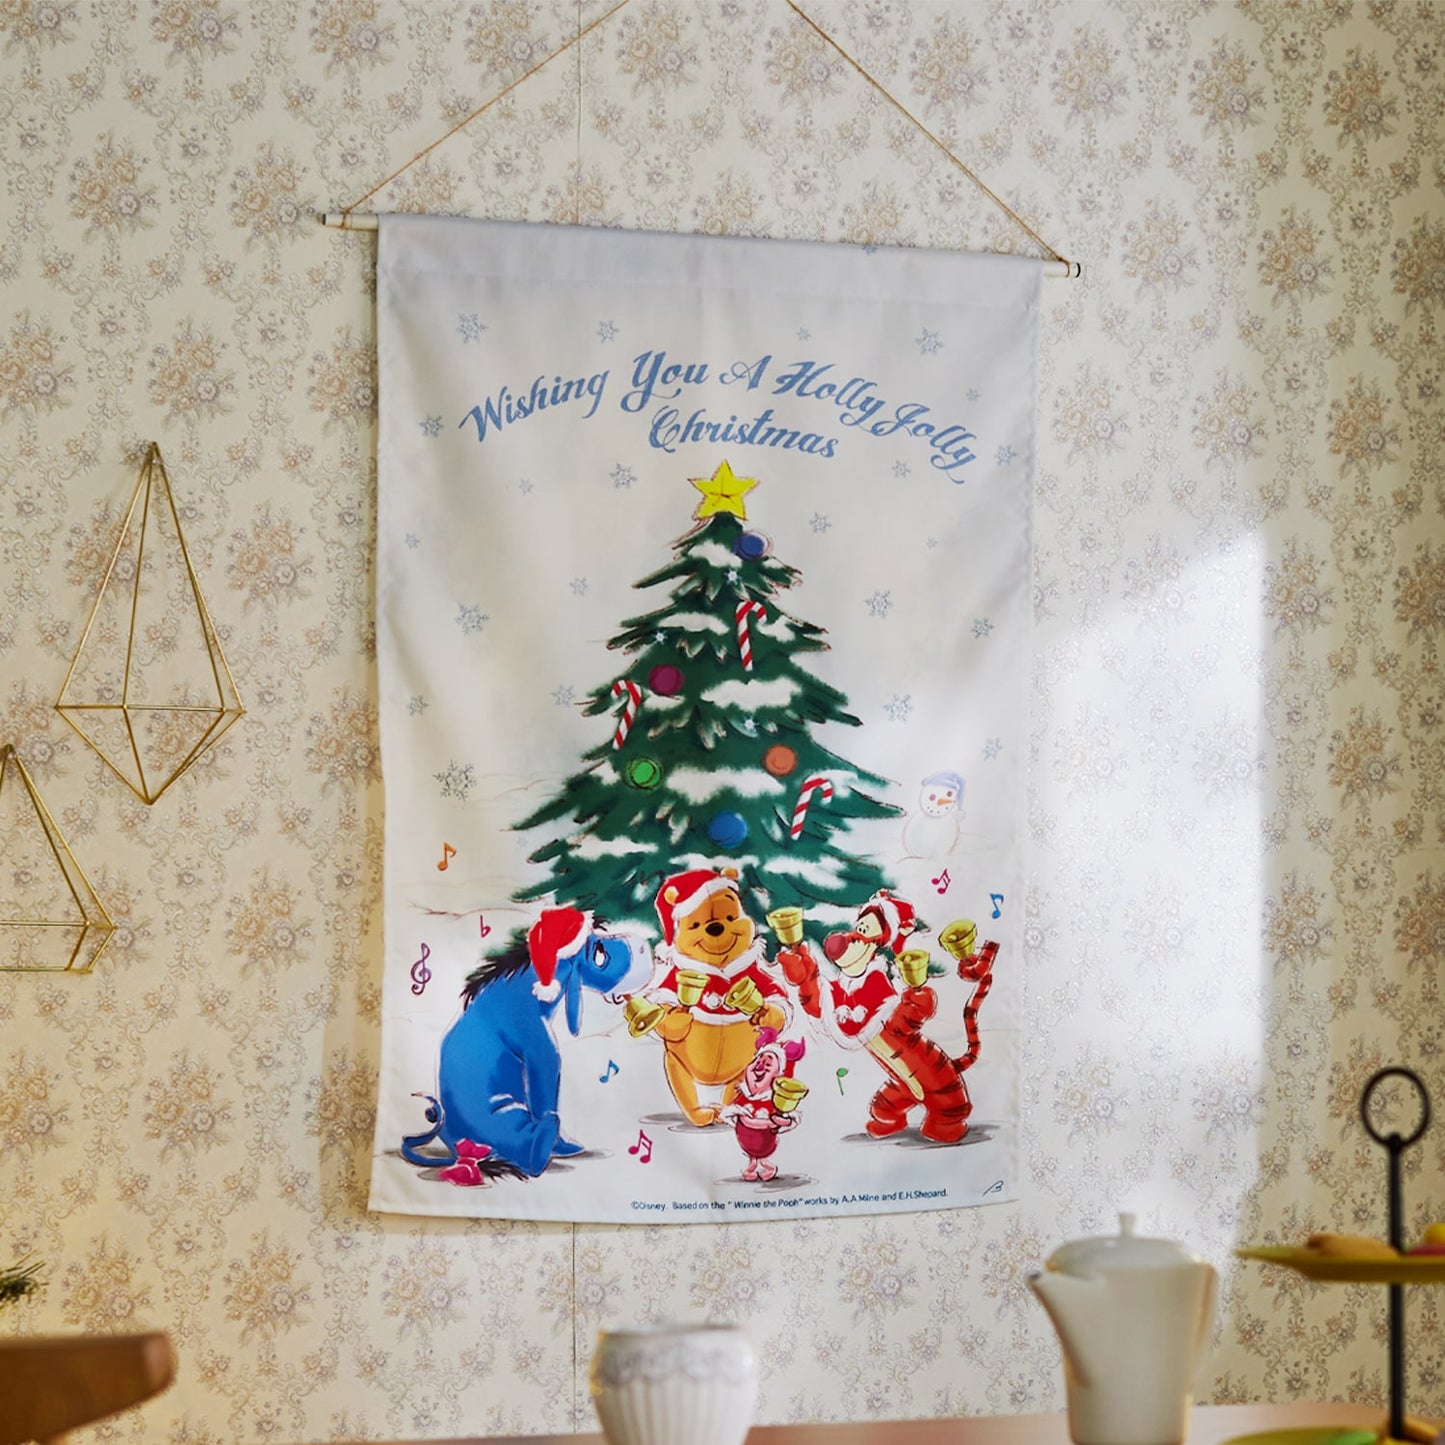  Winnie the Pooh Christmas Tapestry 